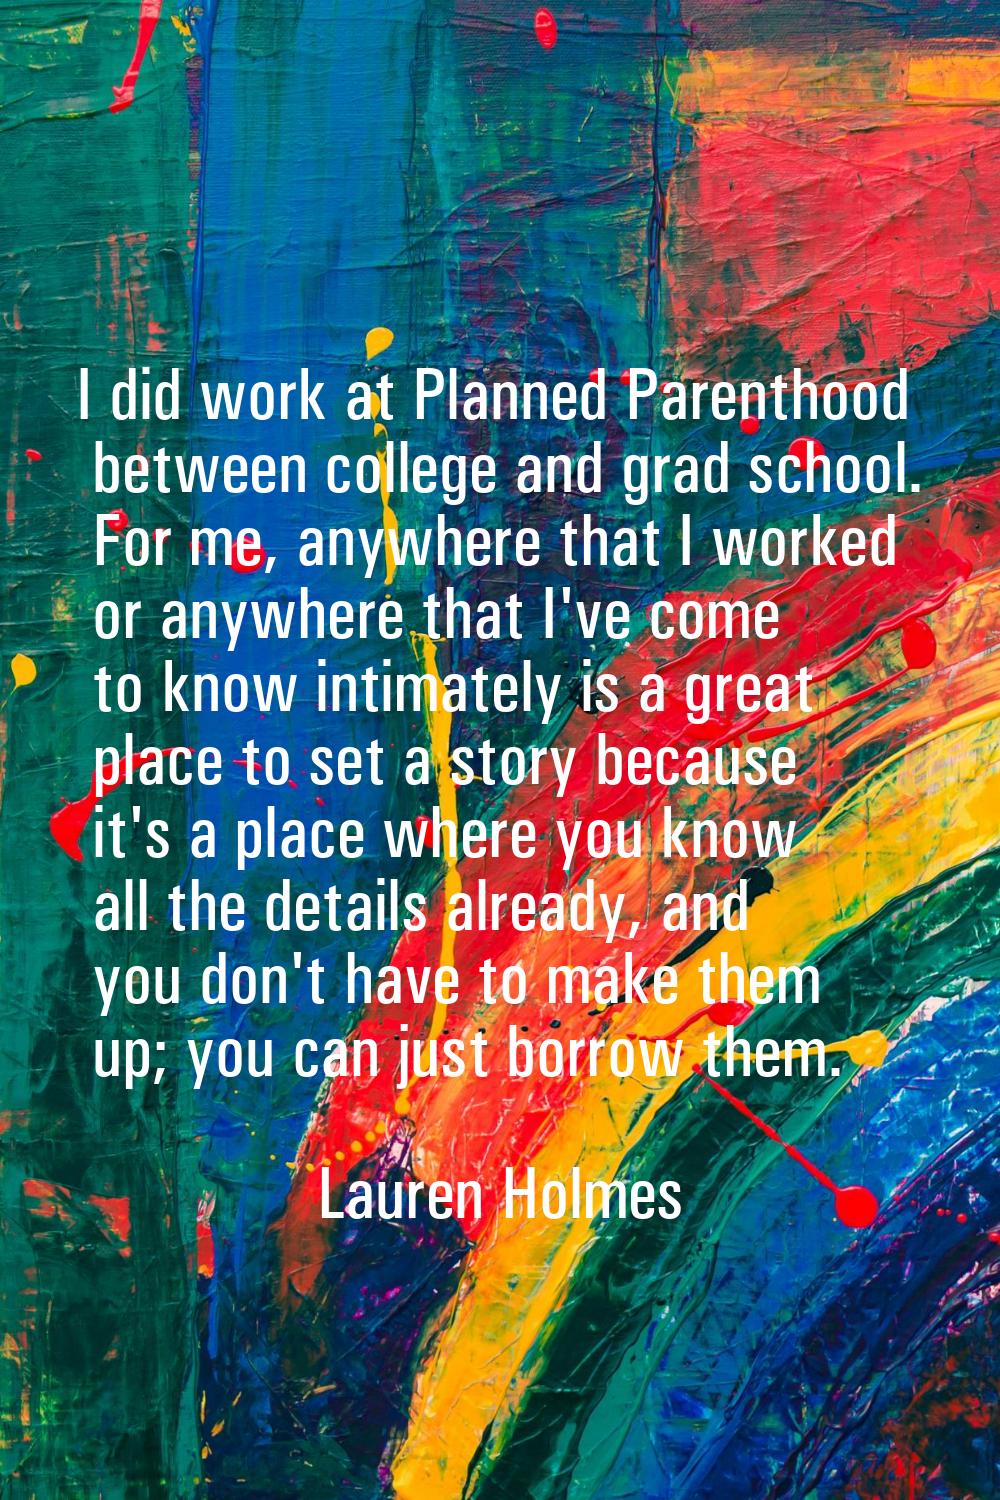 I did work at Planned Parenthood between college and grad school. For me, anywhere that I worked or